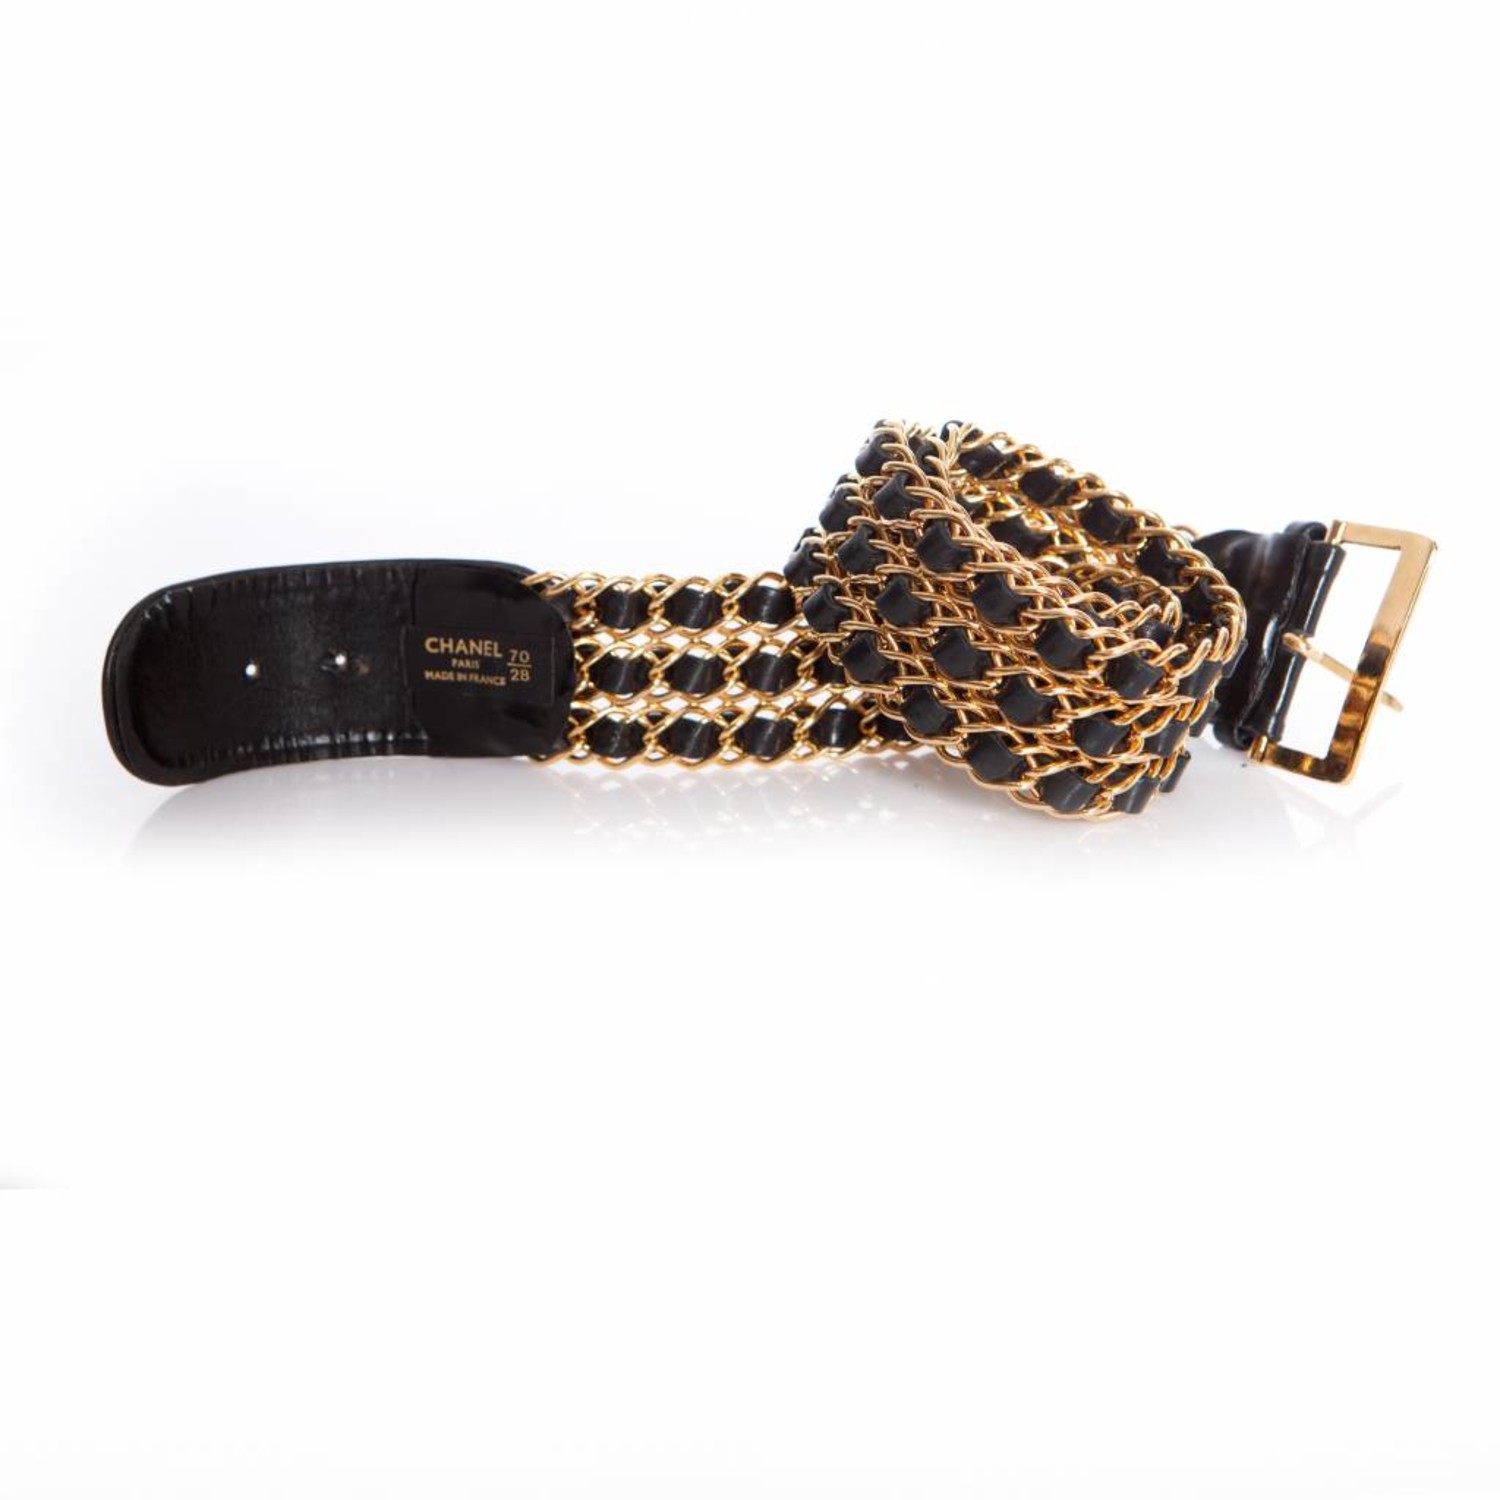 Chanel Gold & Black Leather Chain Belt 2 Q6AABW17KB021